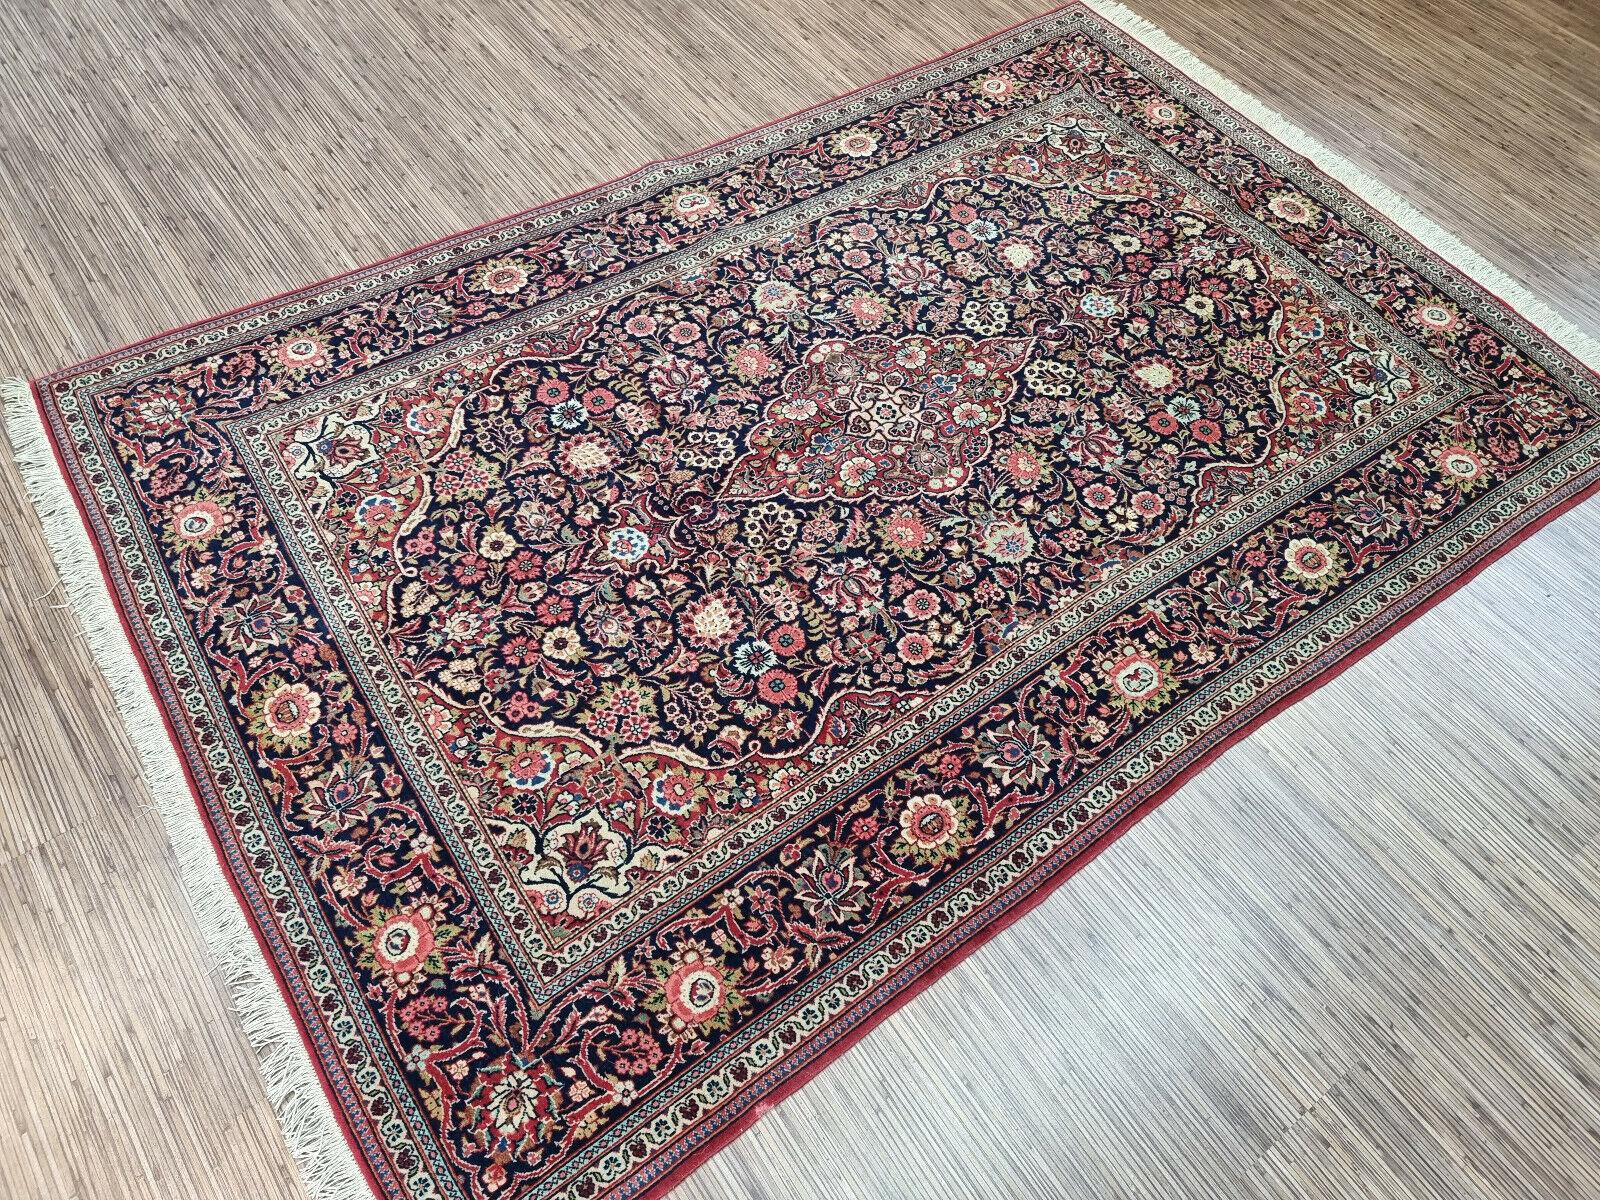 Handmade Antique Persian Style Kashan Rug 4.3' x 6.6', 1920s - 1D77 In Good Condition For Sale In Bordeaux, FR